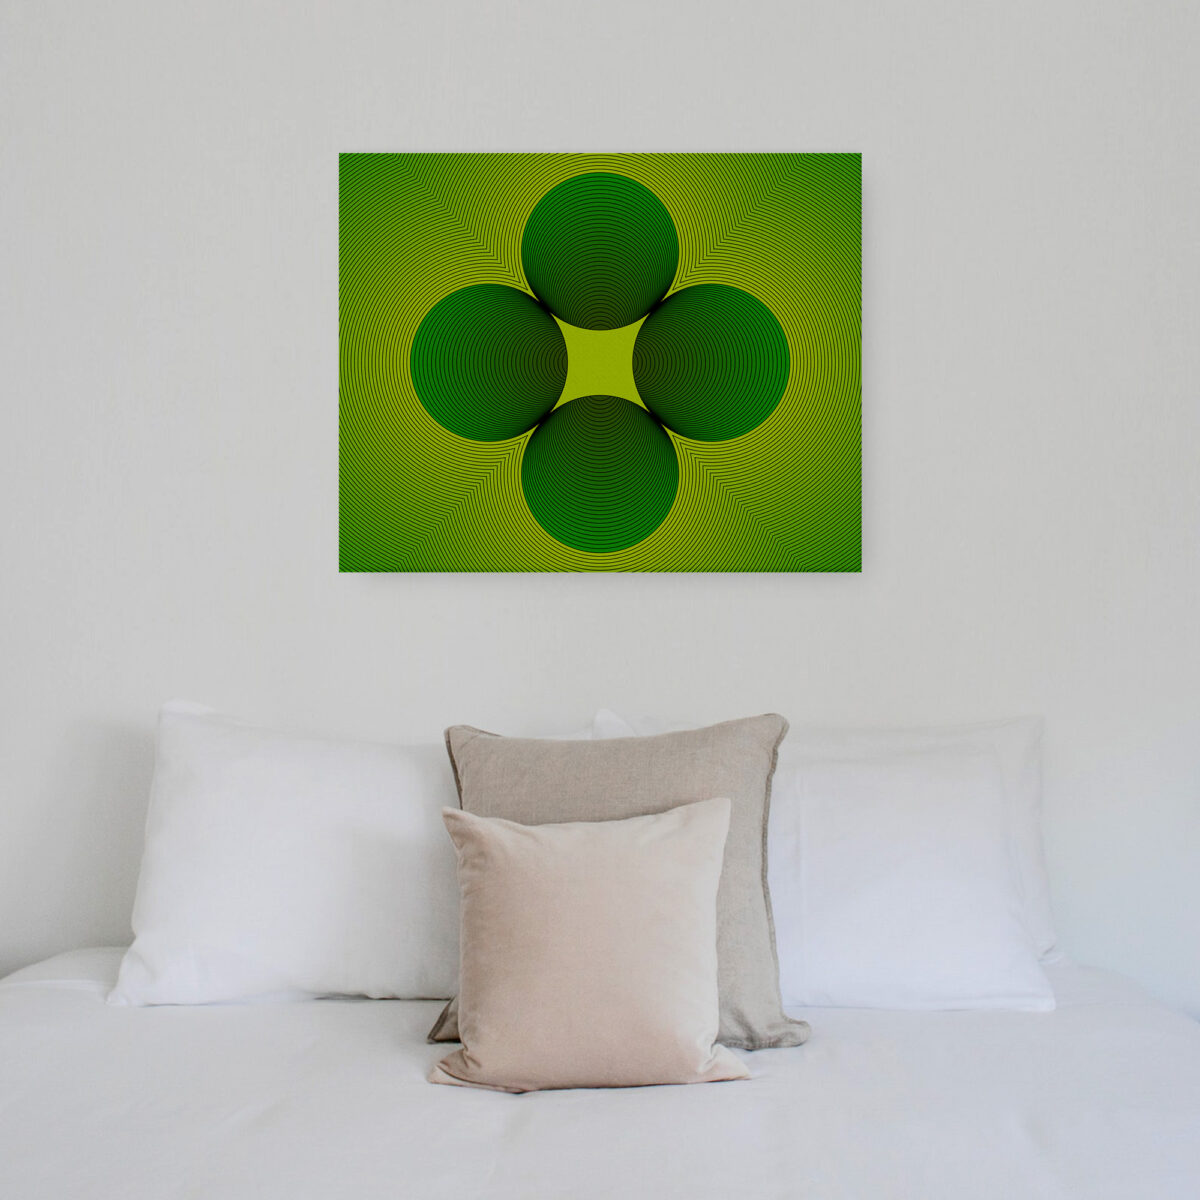 Clover canvas print hanging on a wall